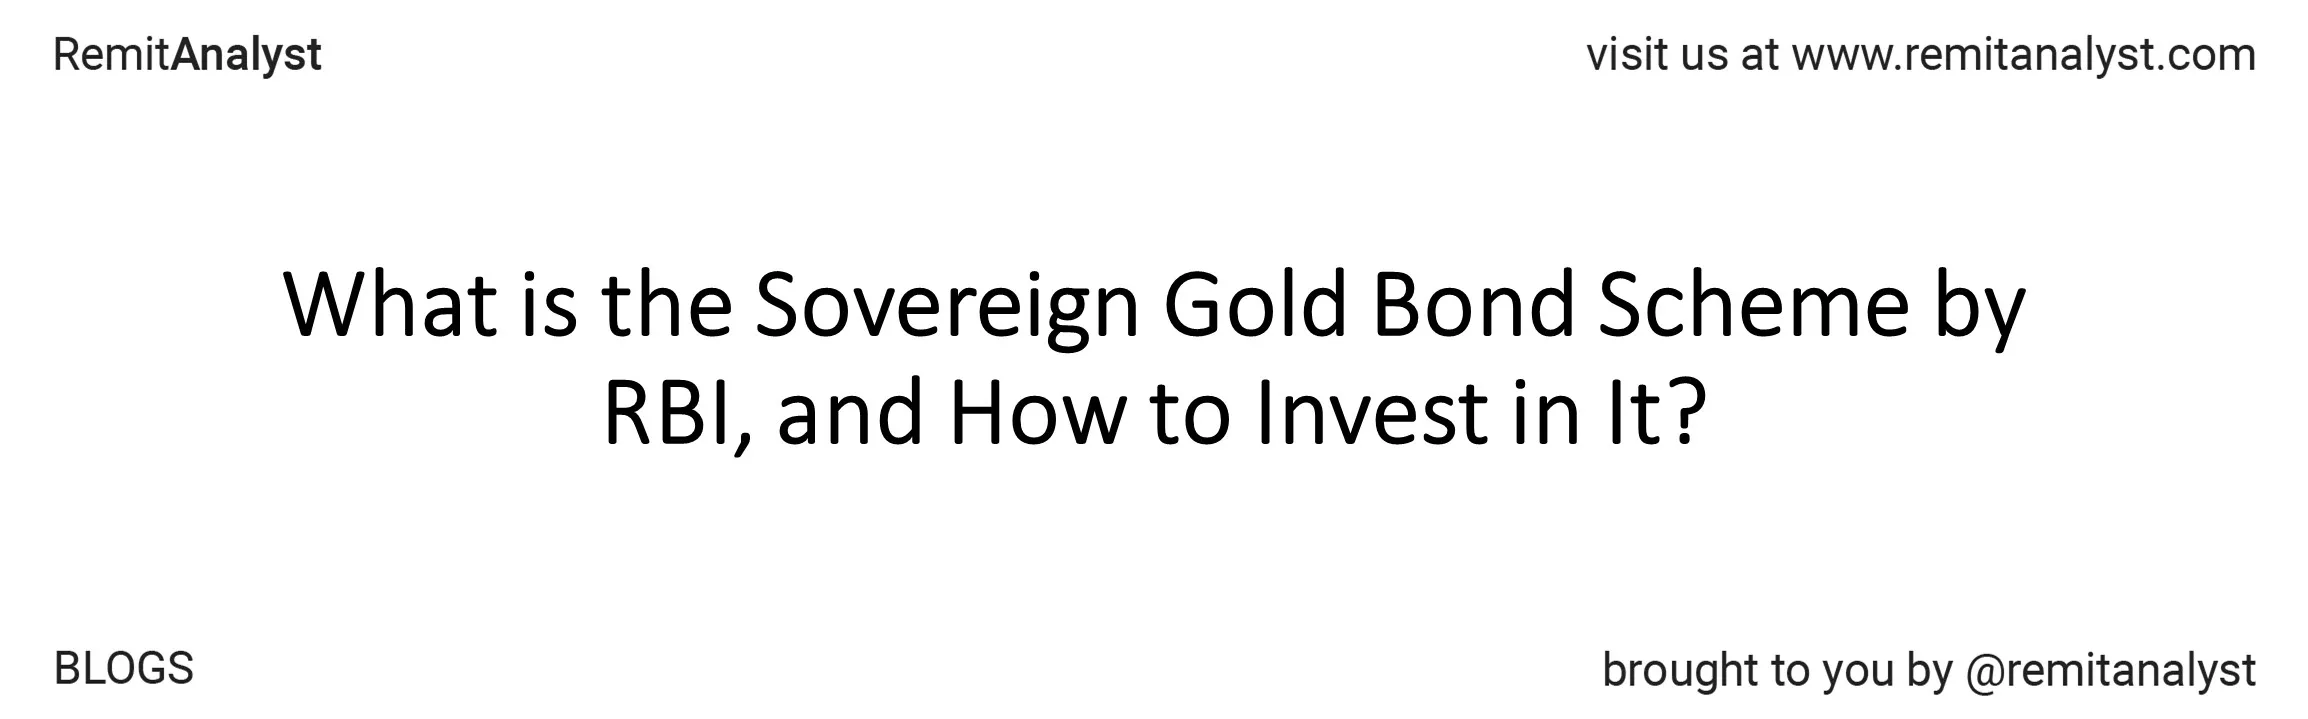 how-to-invest-in-sovereign-gold-bond-scheme-by-rbi-title